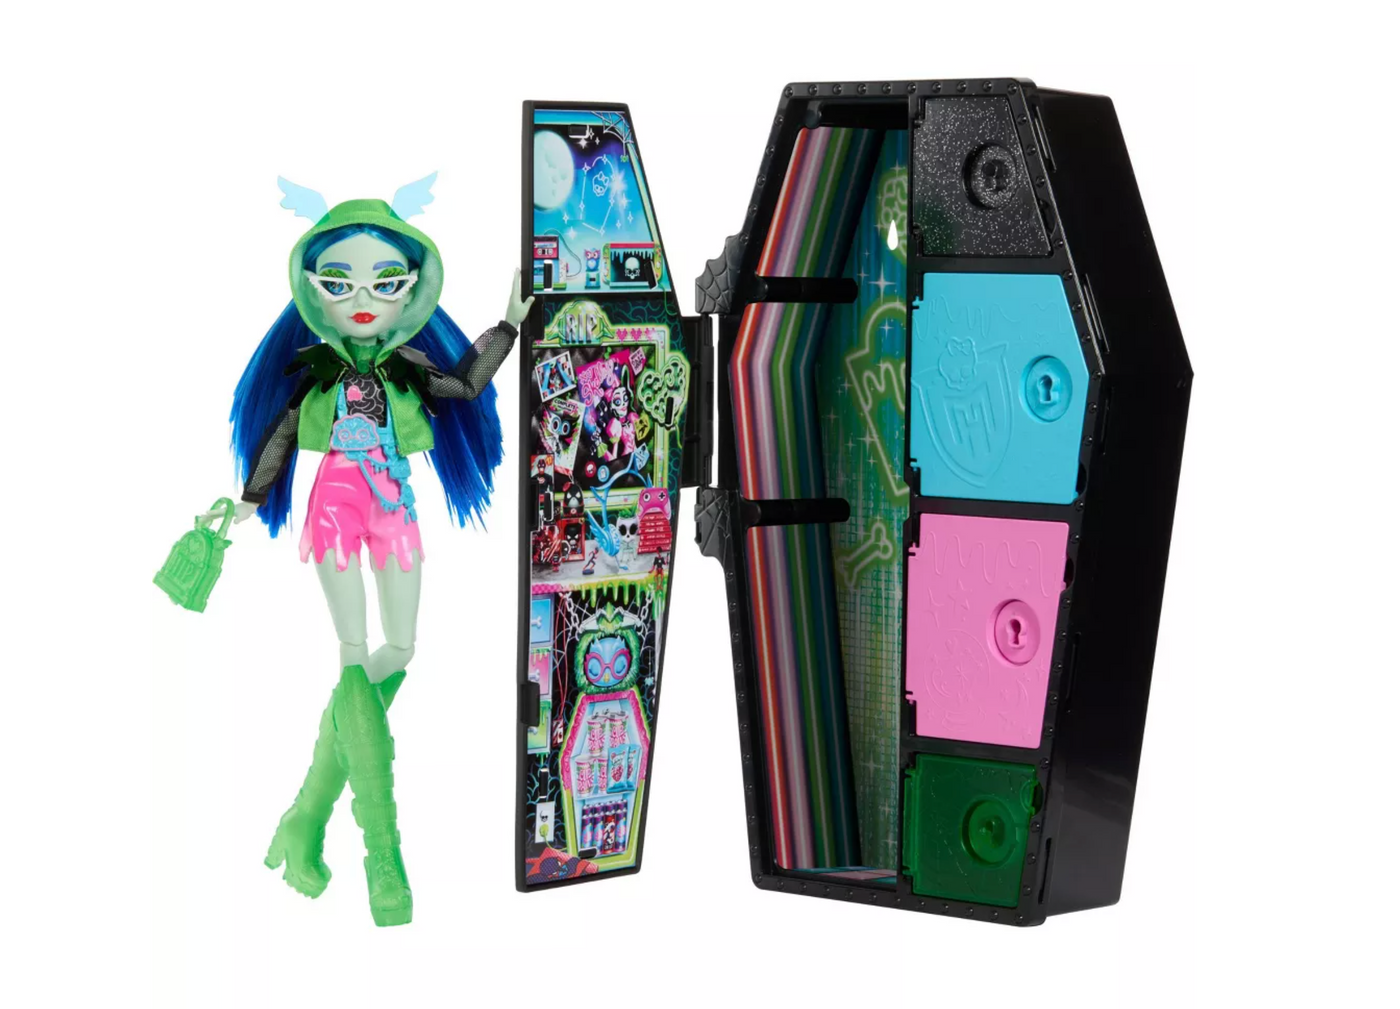 Monster High Skulltimate Secrets Neon Frights Ghoulia Yelps Fashion Doll New